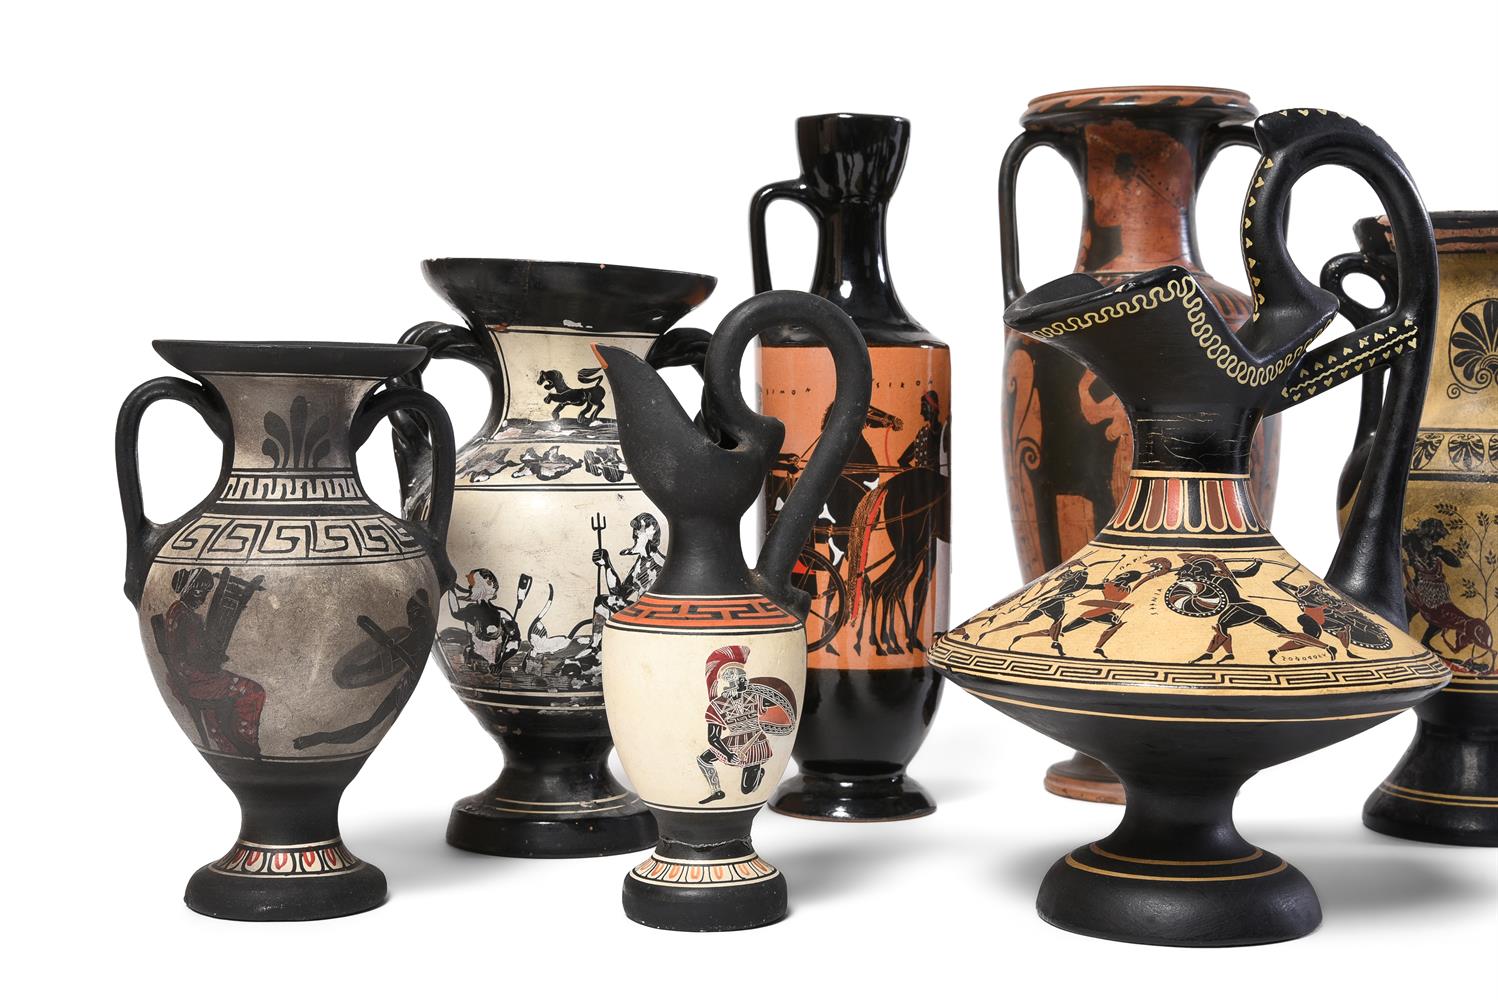 TEN VARIOUS COLD PAINTED TERRACOTTA GREEK STYLE VASES AND JUGS AFTER THE ANTIQUE - Image 3 of 5